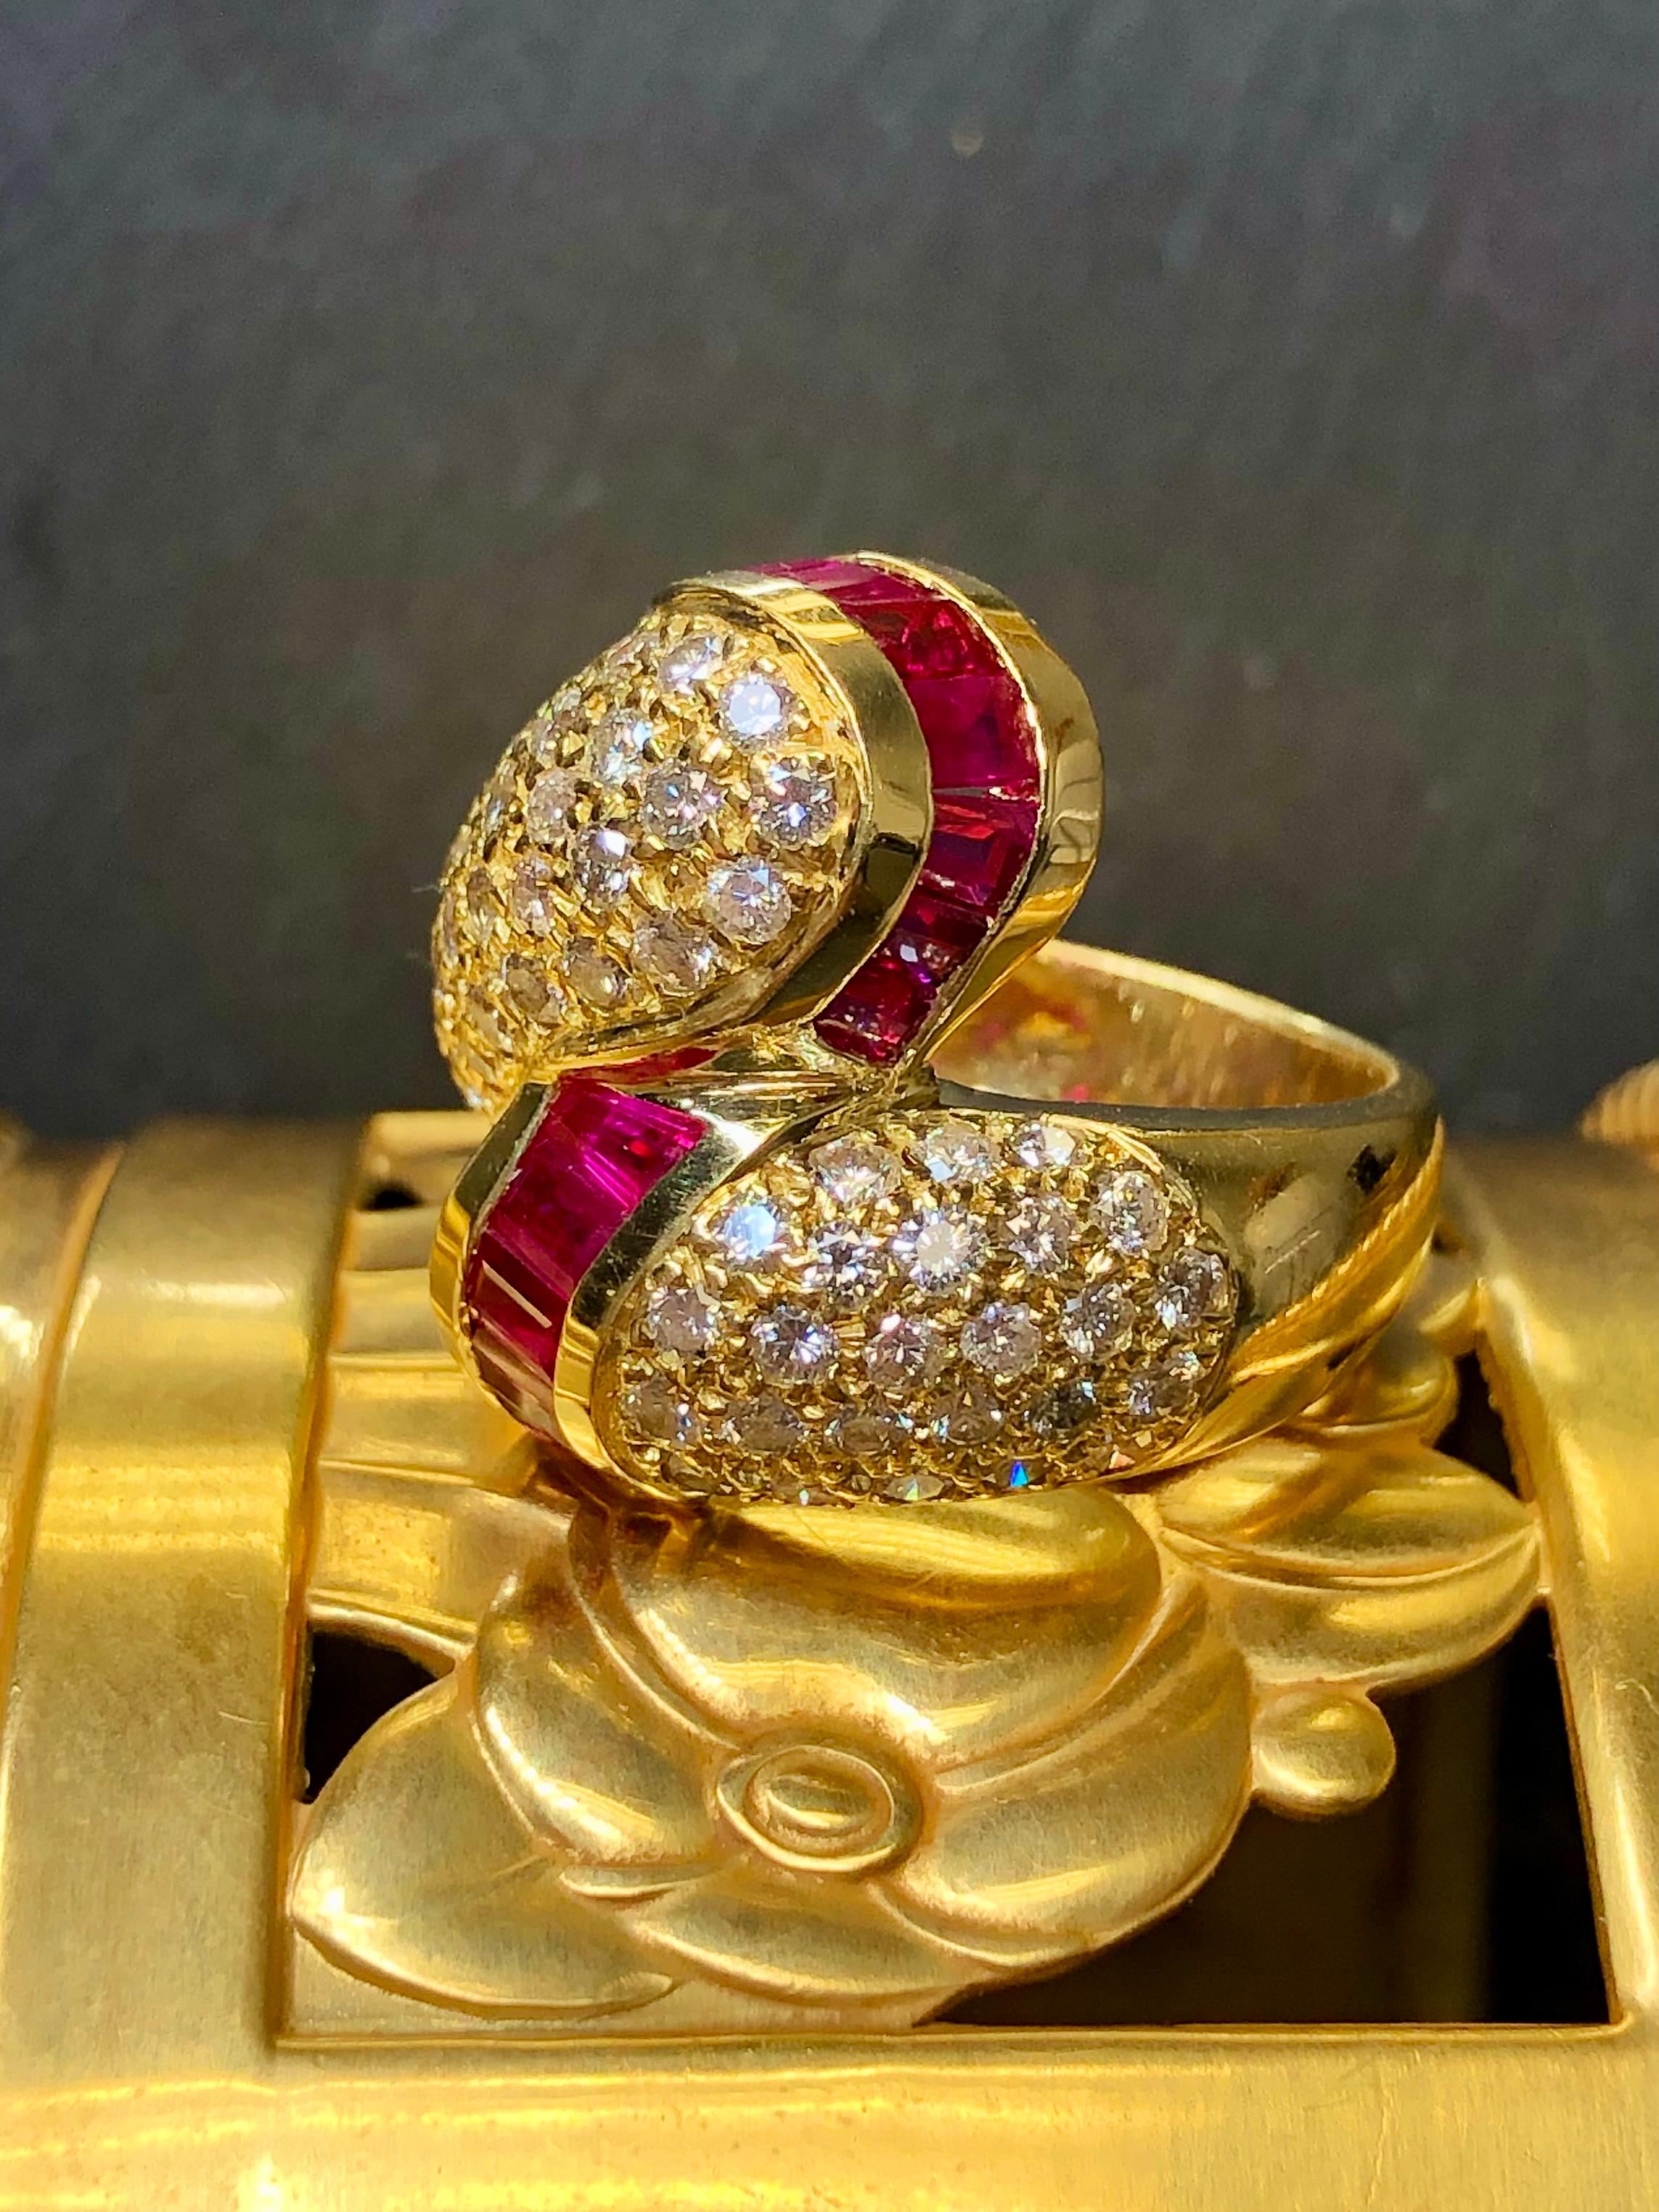 Contemporary Vintage 18K Ruby Pave Diamond Bypass Large Cocktail Ring 4.53cttw Sz 7.75 For Sale